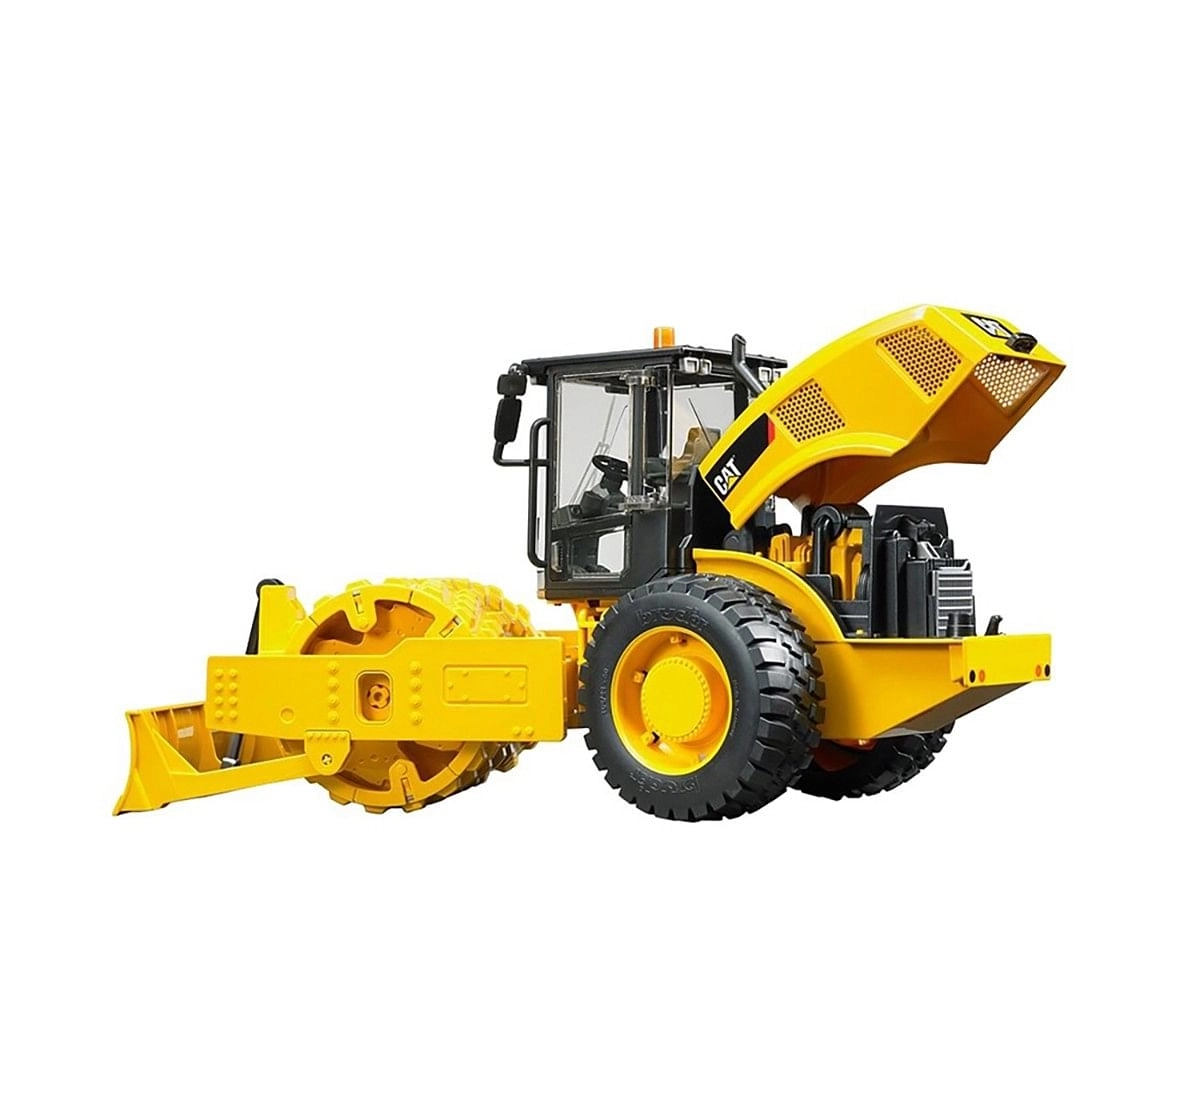 CAT Bruder 1:16 Caterpillar Vibratory Soil Compactor with Levelling Blade Vehicles for Kids age 4Y+ (Yellow)